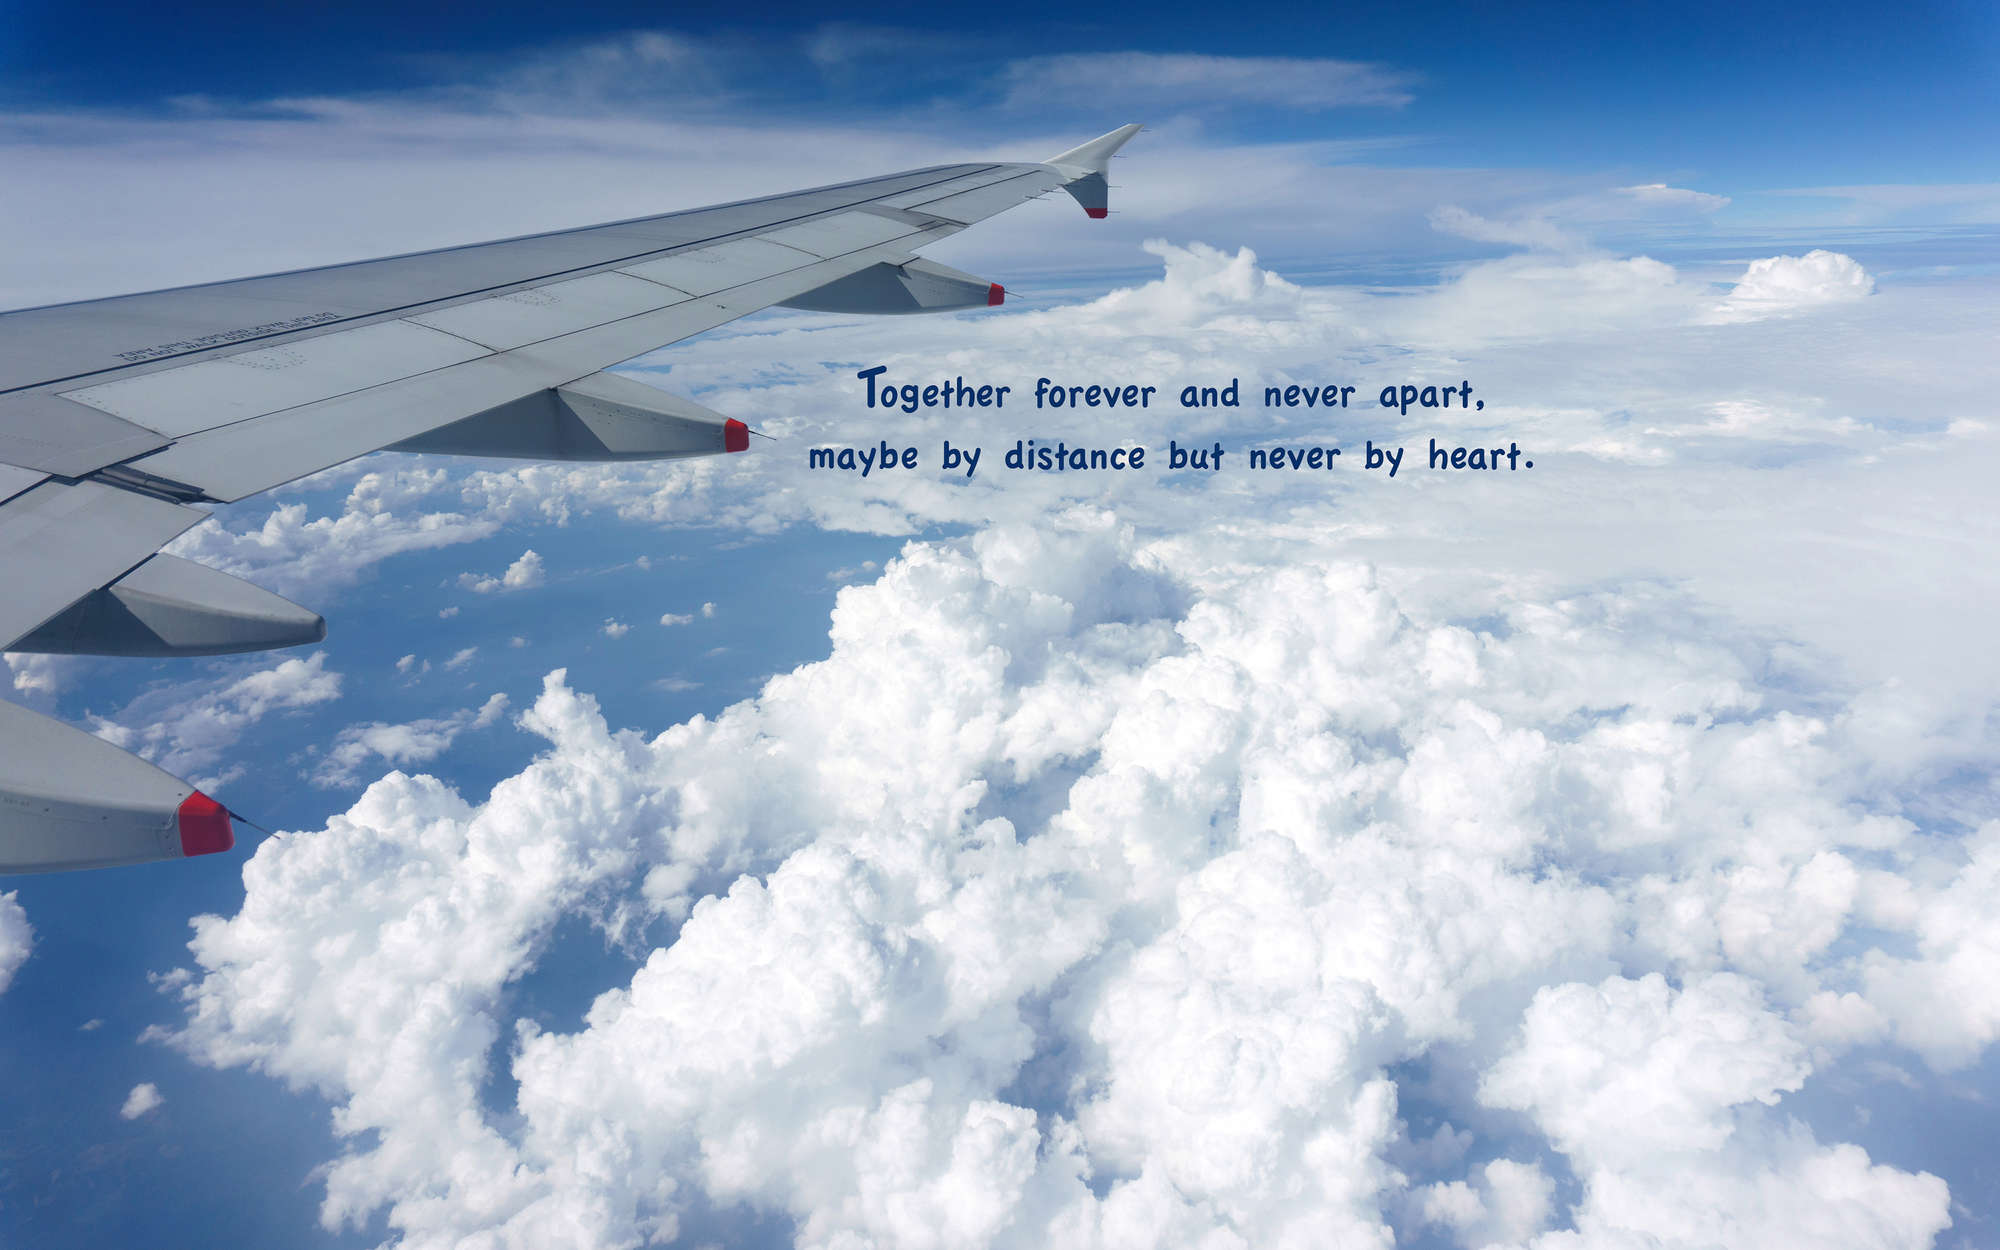             Photo wallpaper Airplane above the clouds with lettering - Premium smooth fleece
        